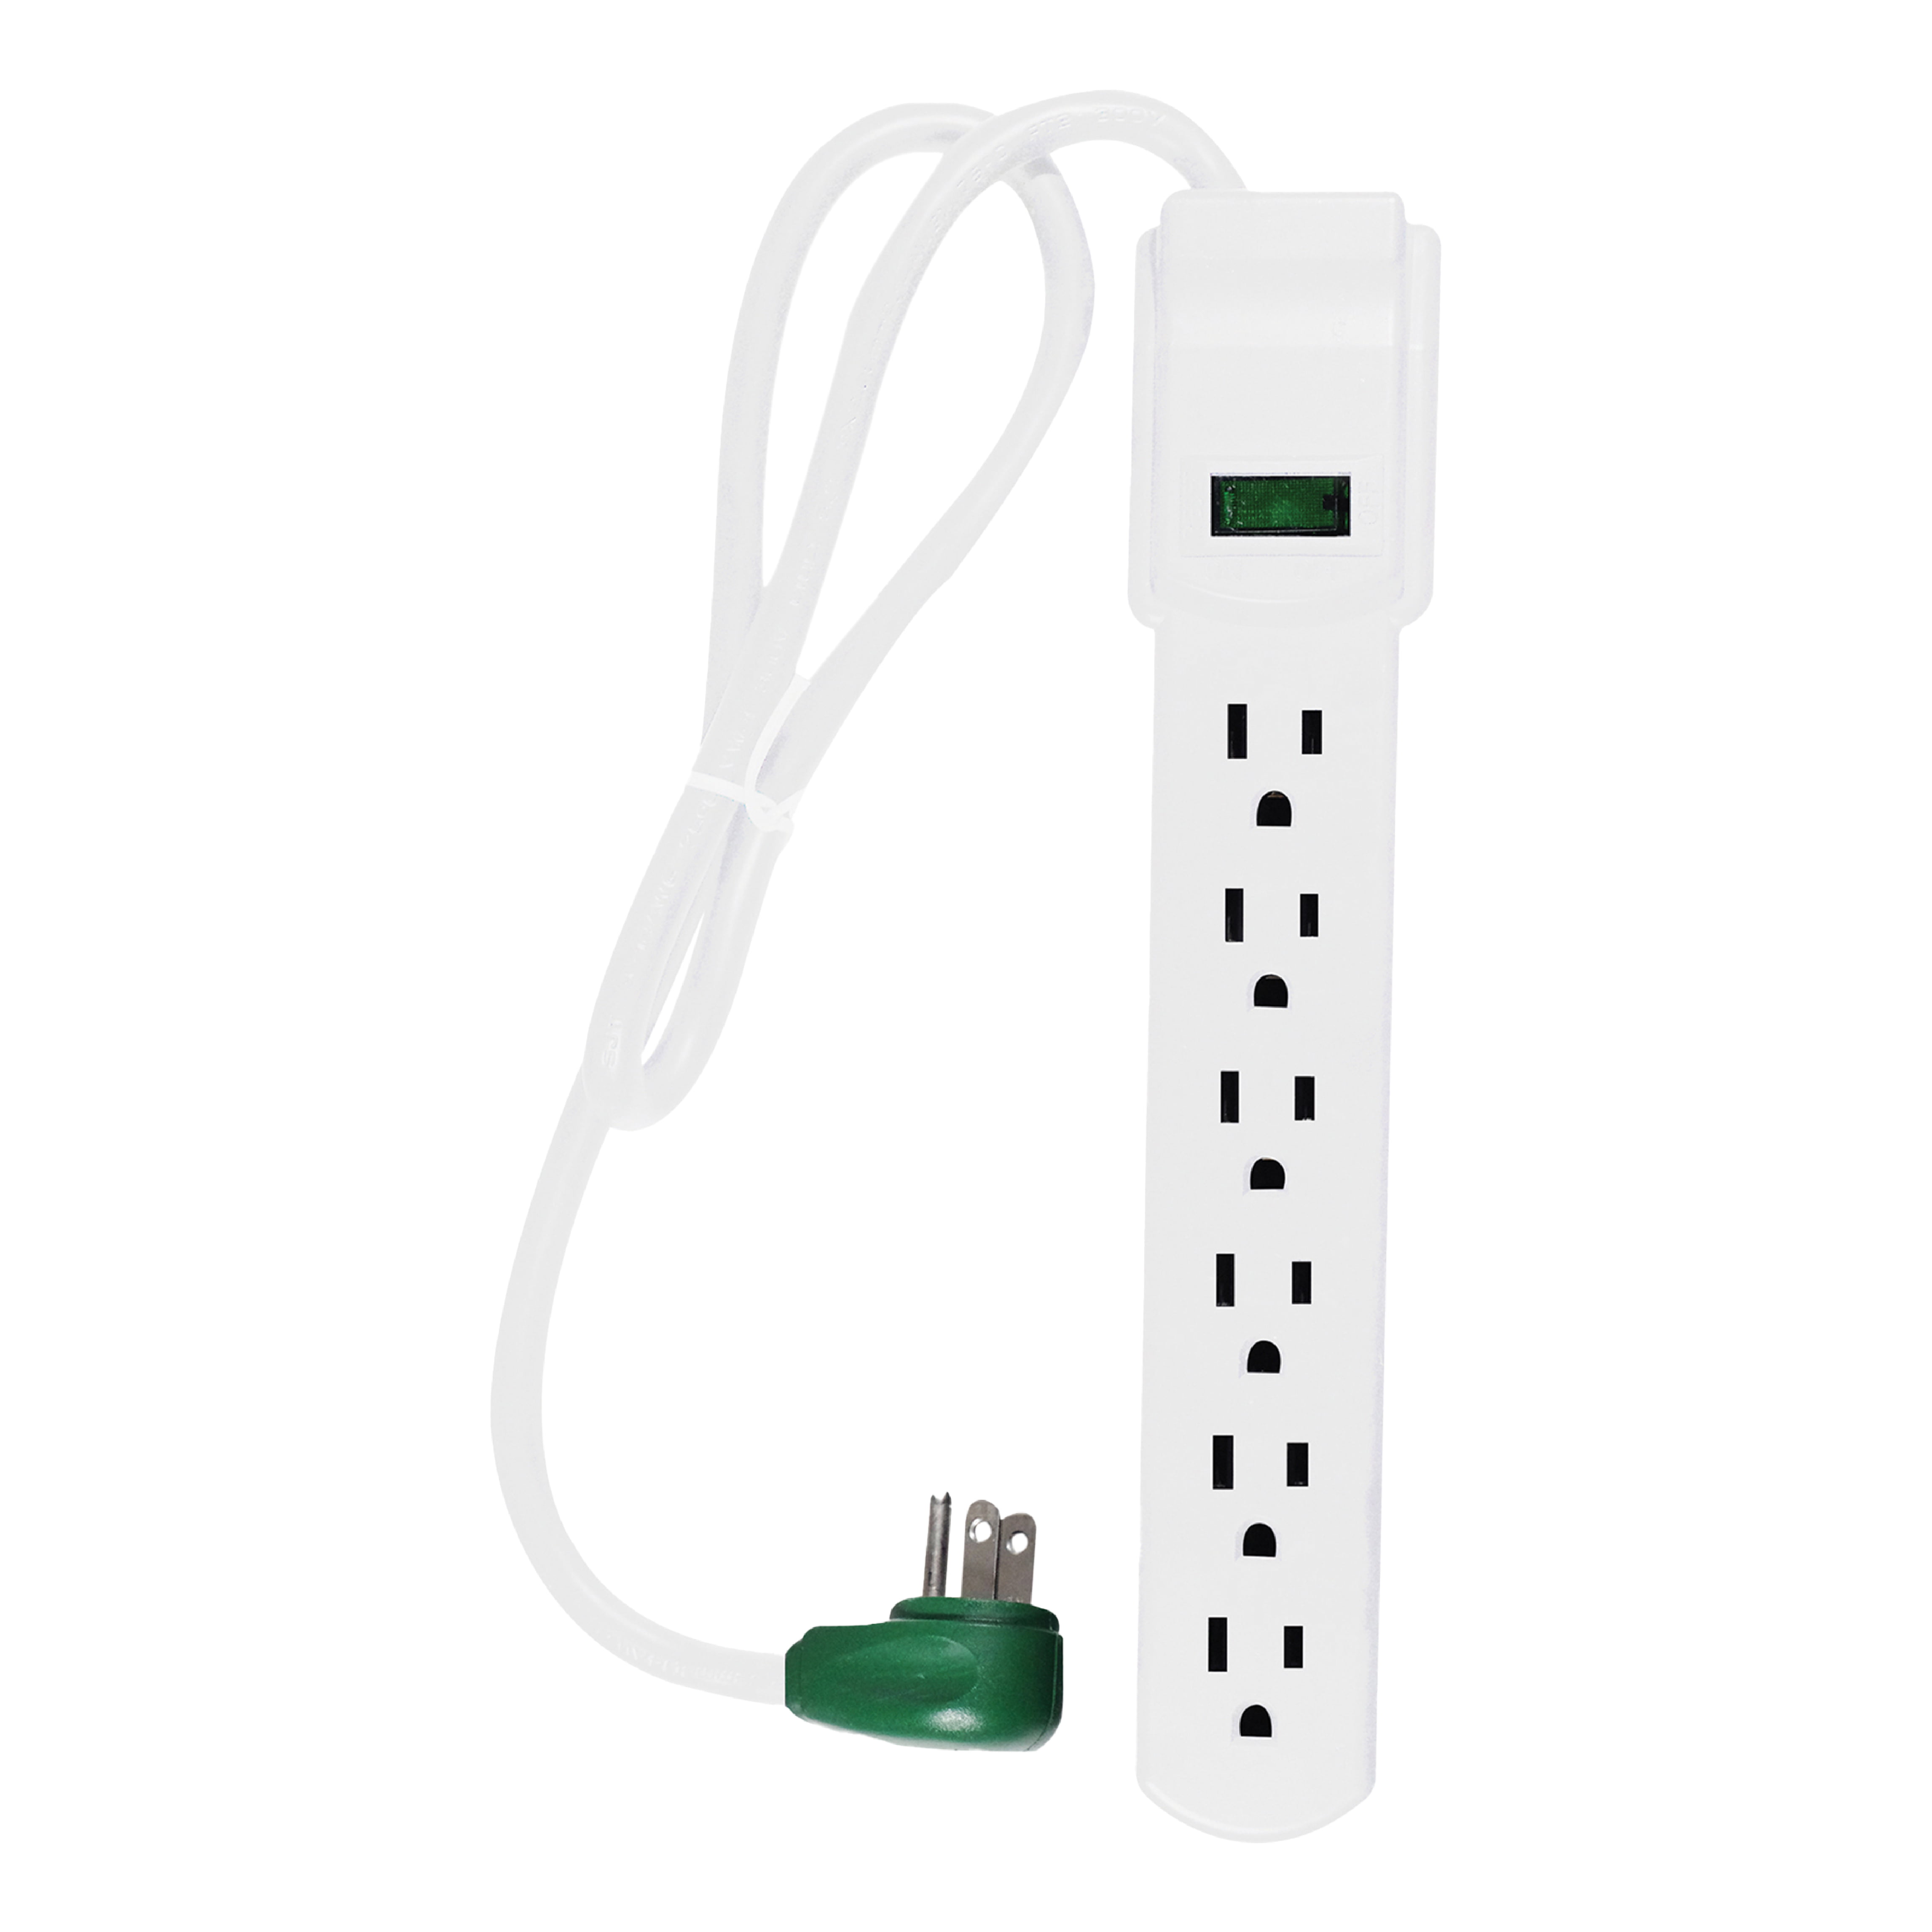 Perfpower Go Green Power GG-16103MIN 6 Outlet Mini Surge Protector White